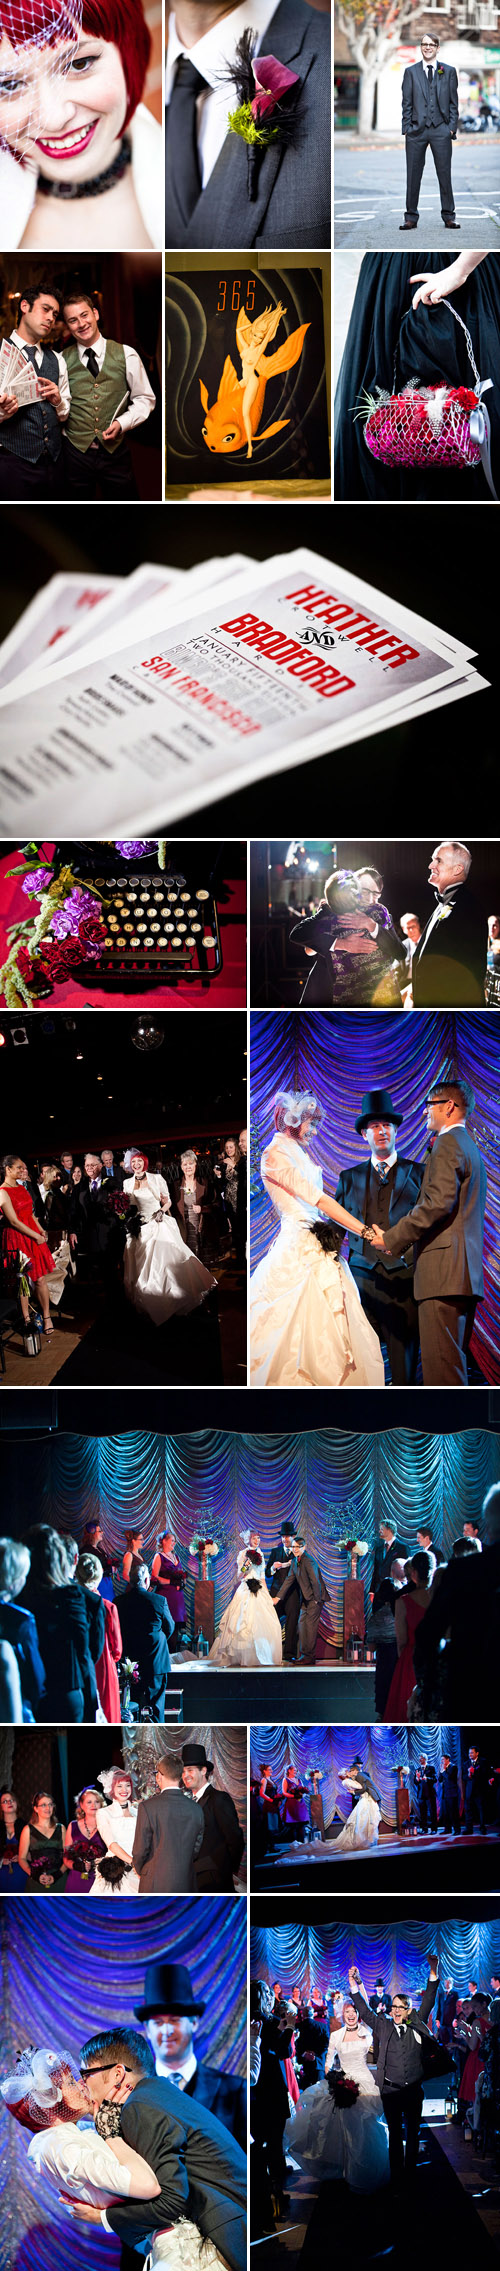 Vaudeville and burlesque inspired wedding at Bimbo's 365 Club in San Francisco, California, photographed by Jules Bianchi